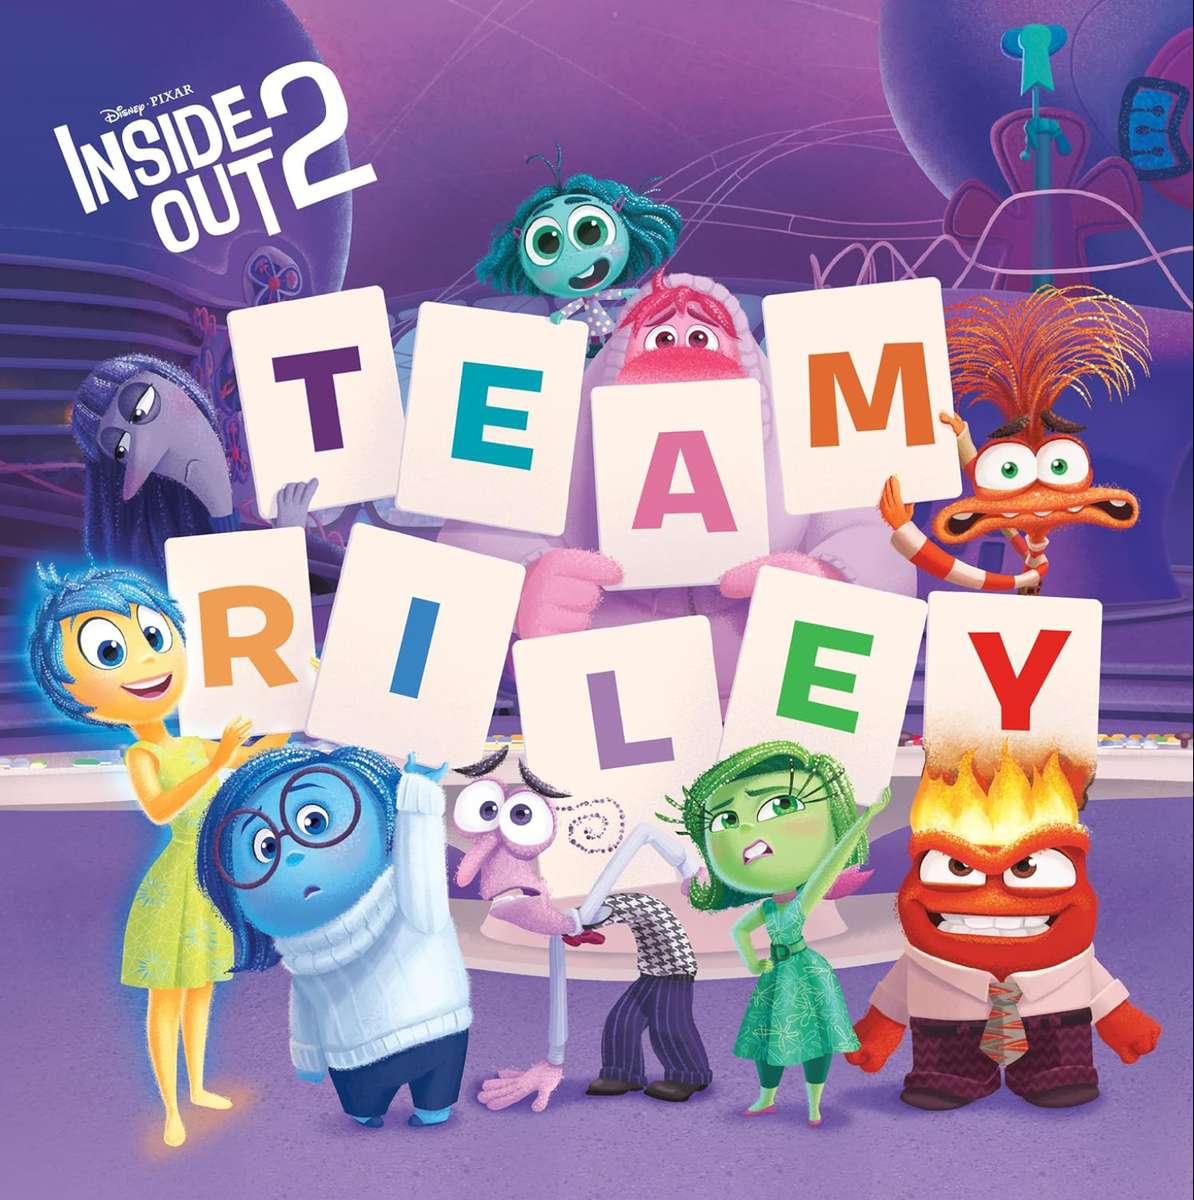 Inside Out 2 Pictureback Book❤️❤️❤️❤️ online παζλ